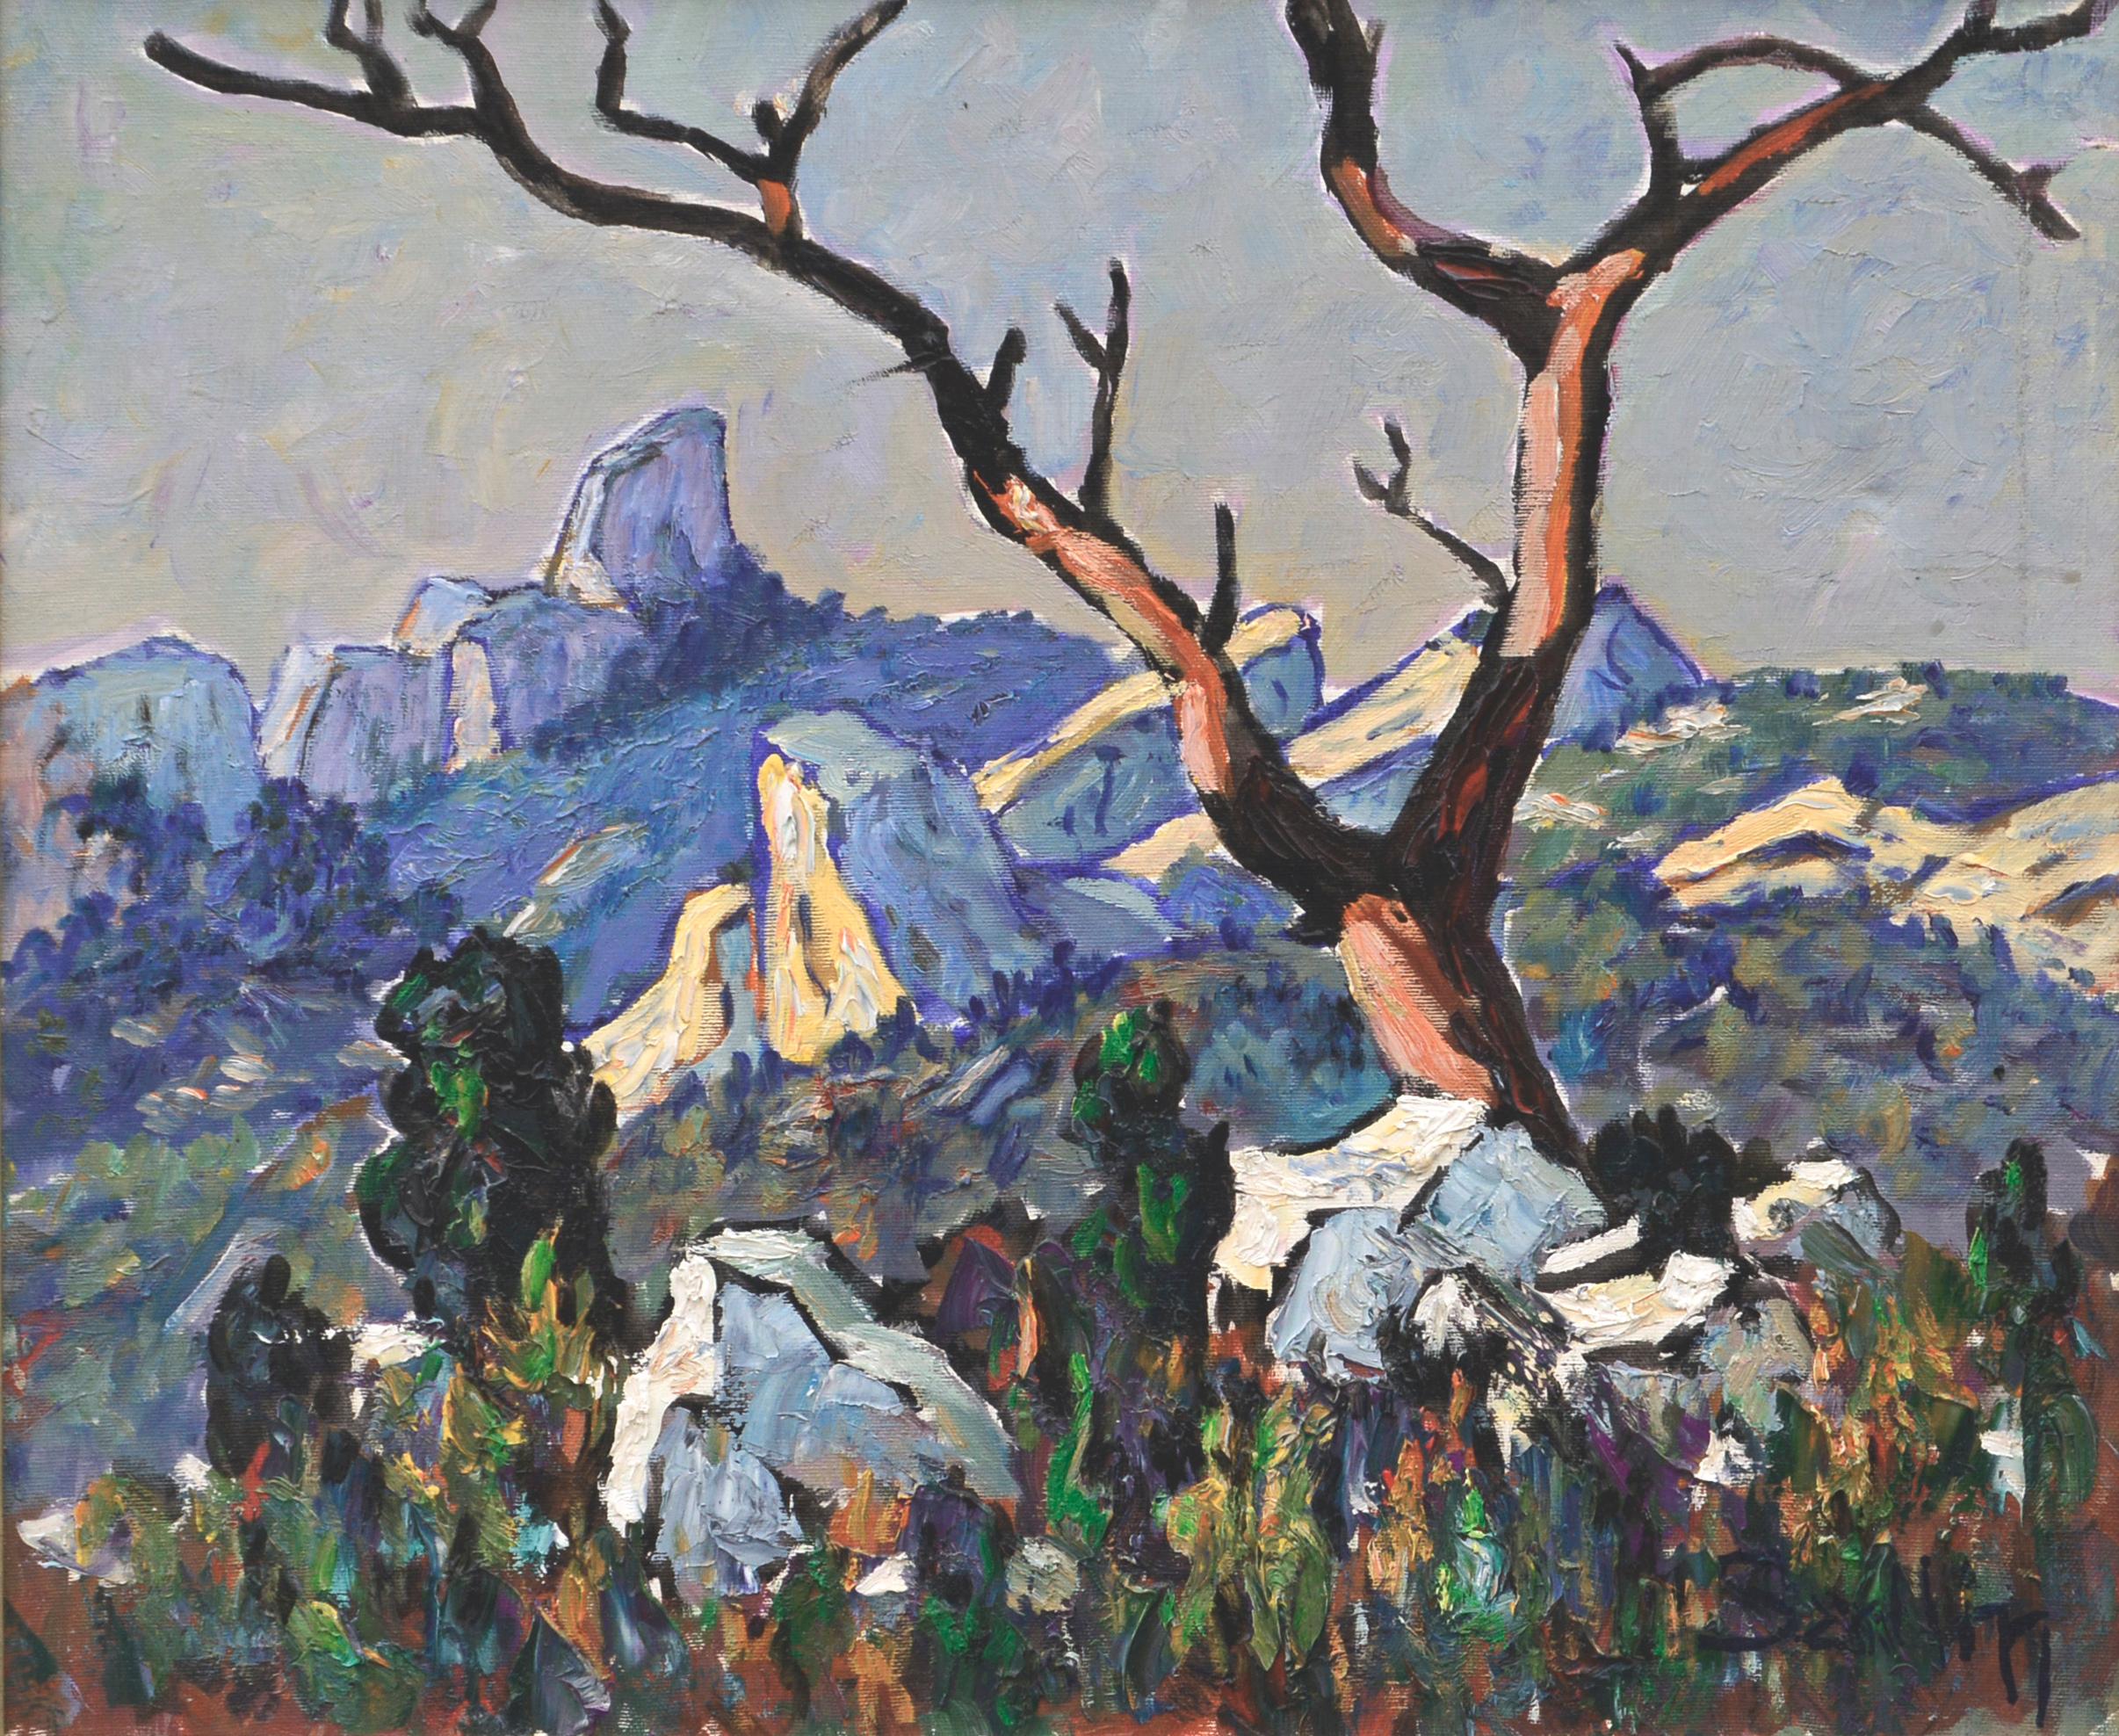 Rocky Landscape with a Bare Tree Landscape - Painting by Sarlin